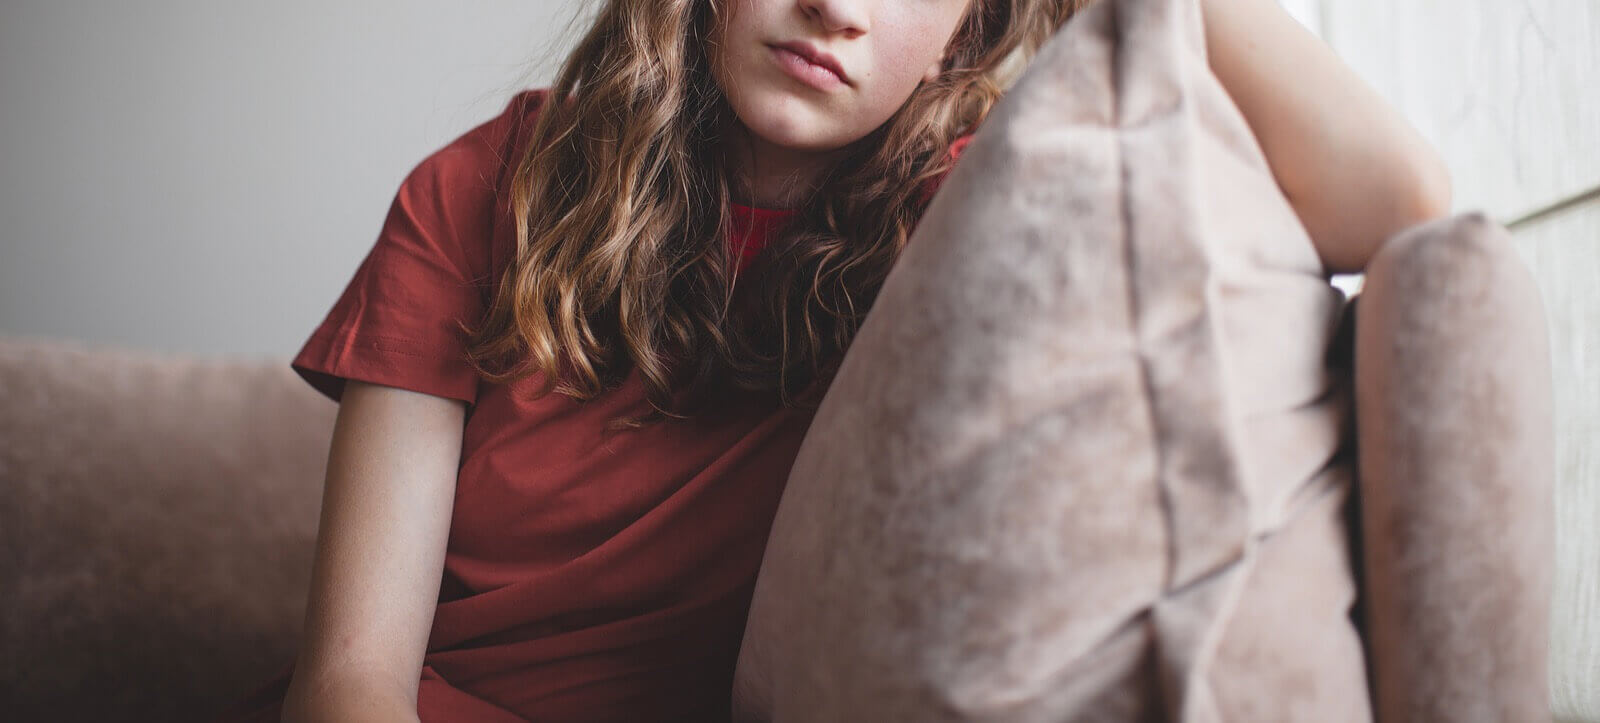 Shows a teen girl looking sad and thinking. Represents how teenage counseling in Grand Rapids, MI is a great resource for teens navigating their depression symptoms.